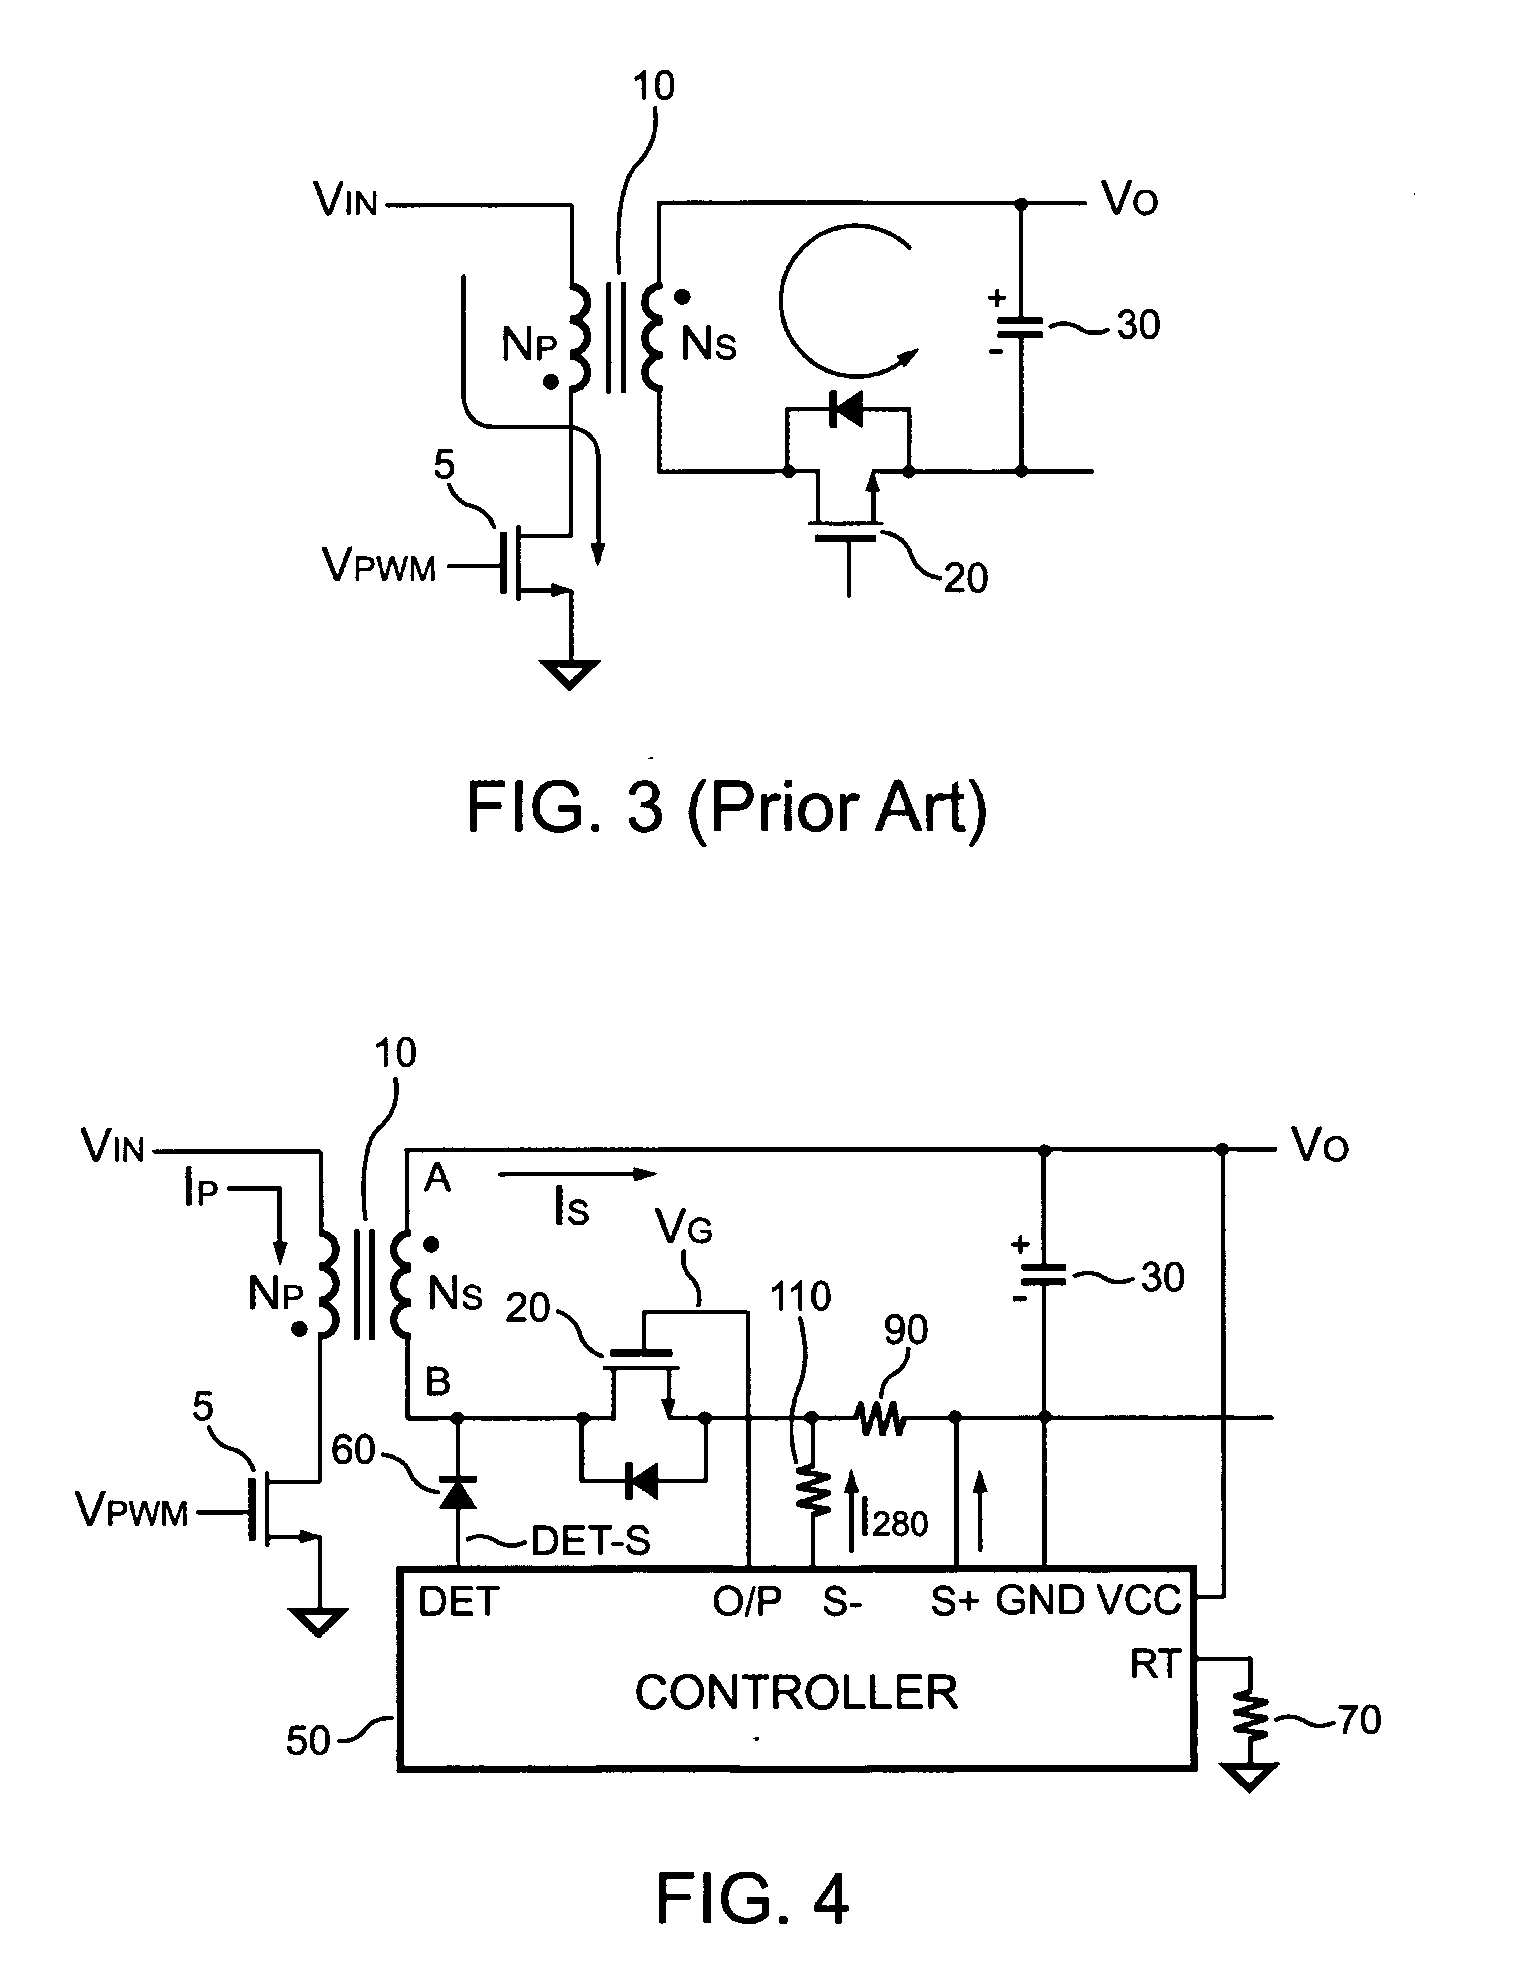 Pwm controller for synchronous rectifier of flyback power converter